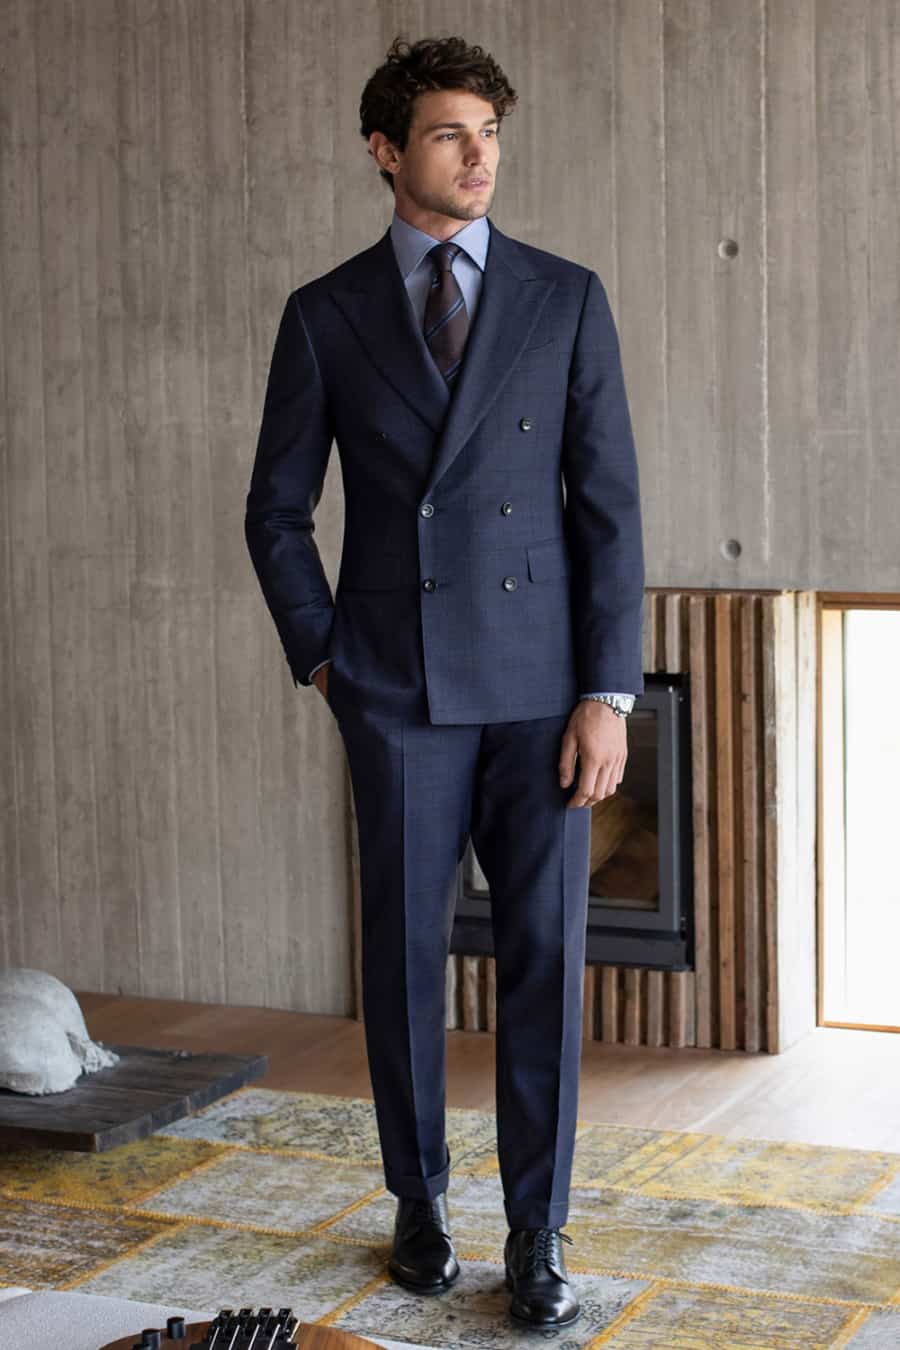 Men's navy double-breasted suit worn with black Derby shoes